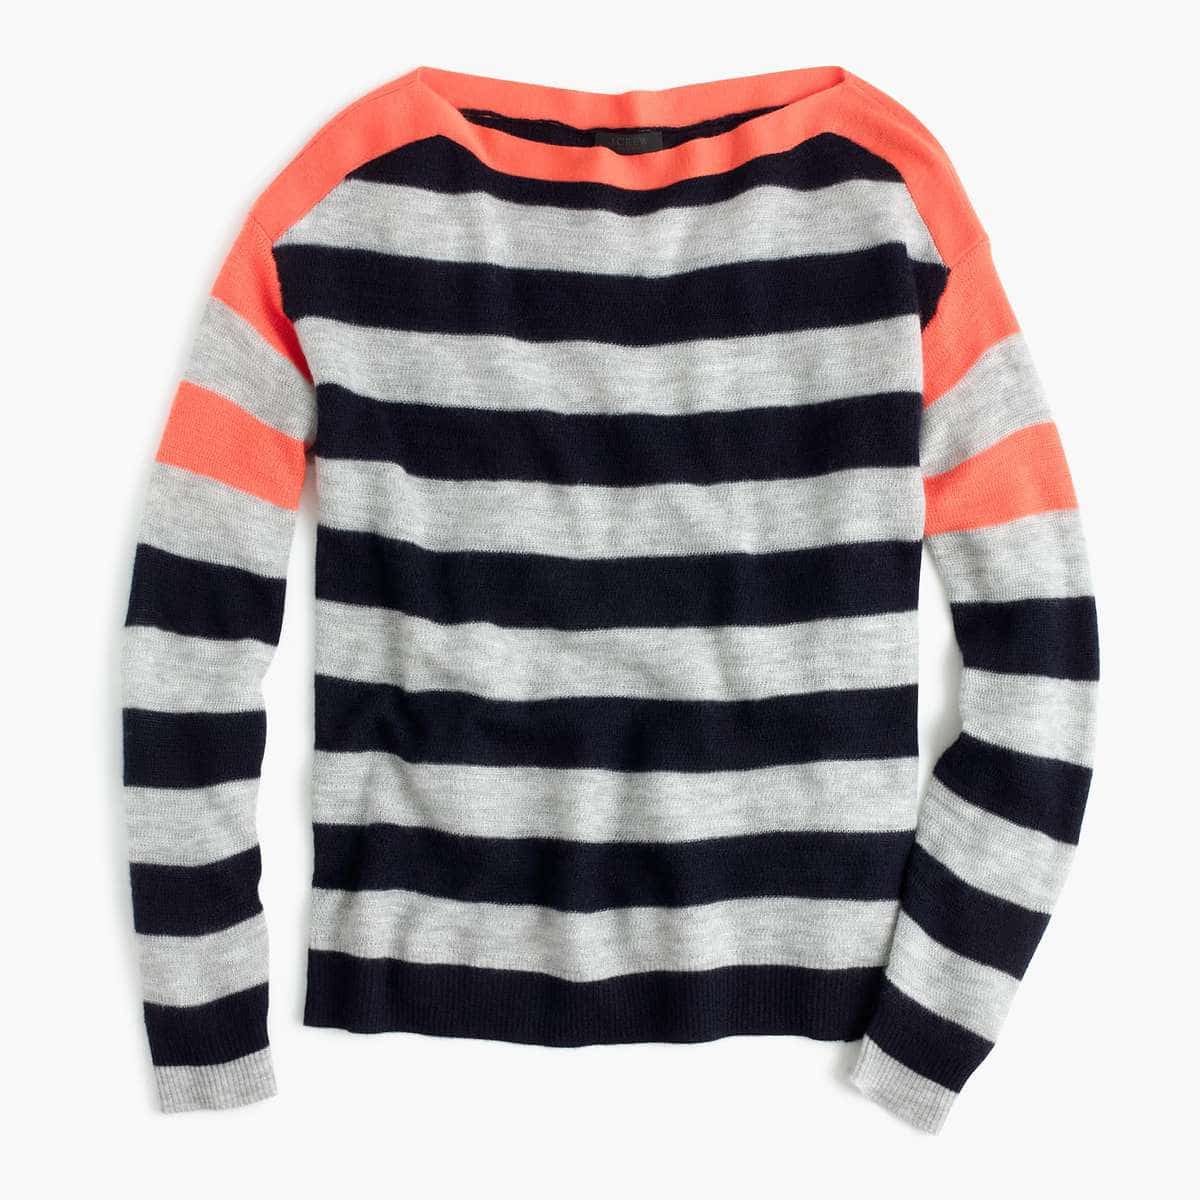 J. CREW Collection featherweight cashmere striped boatneck sweater